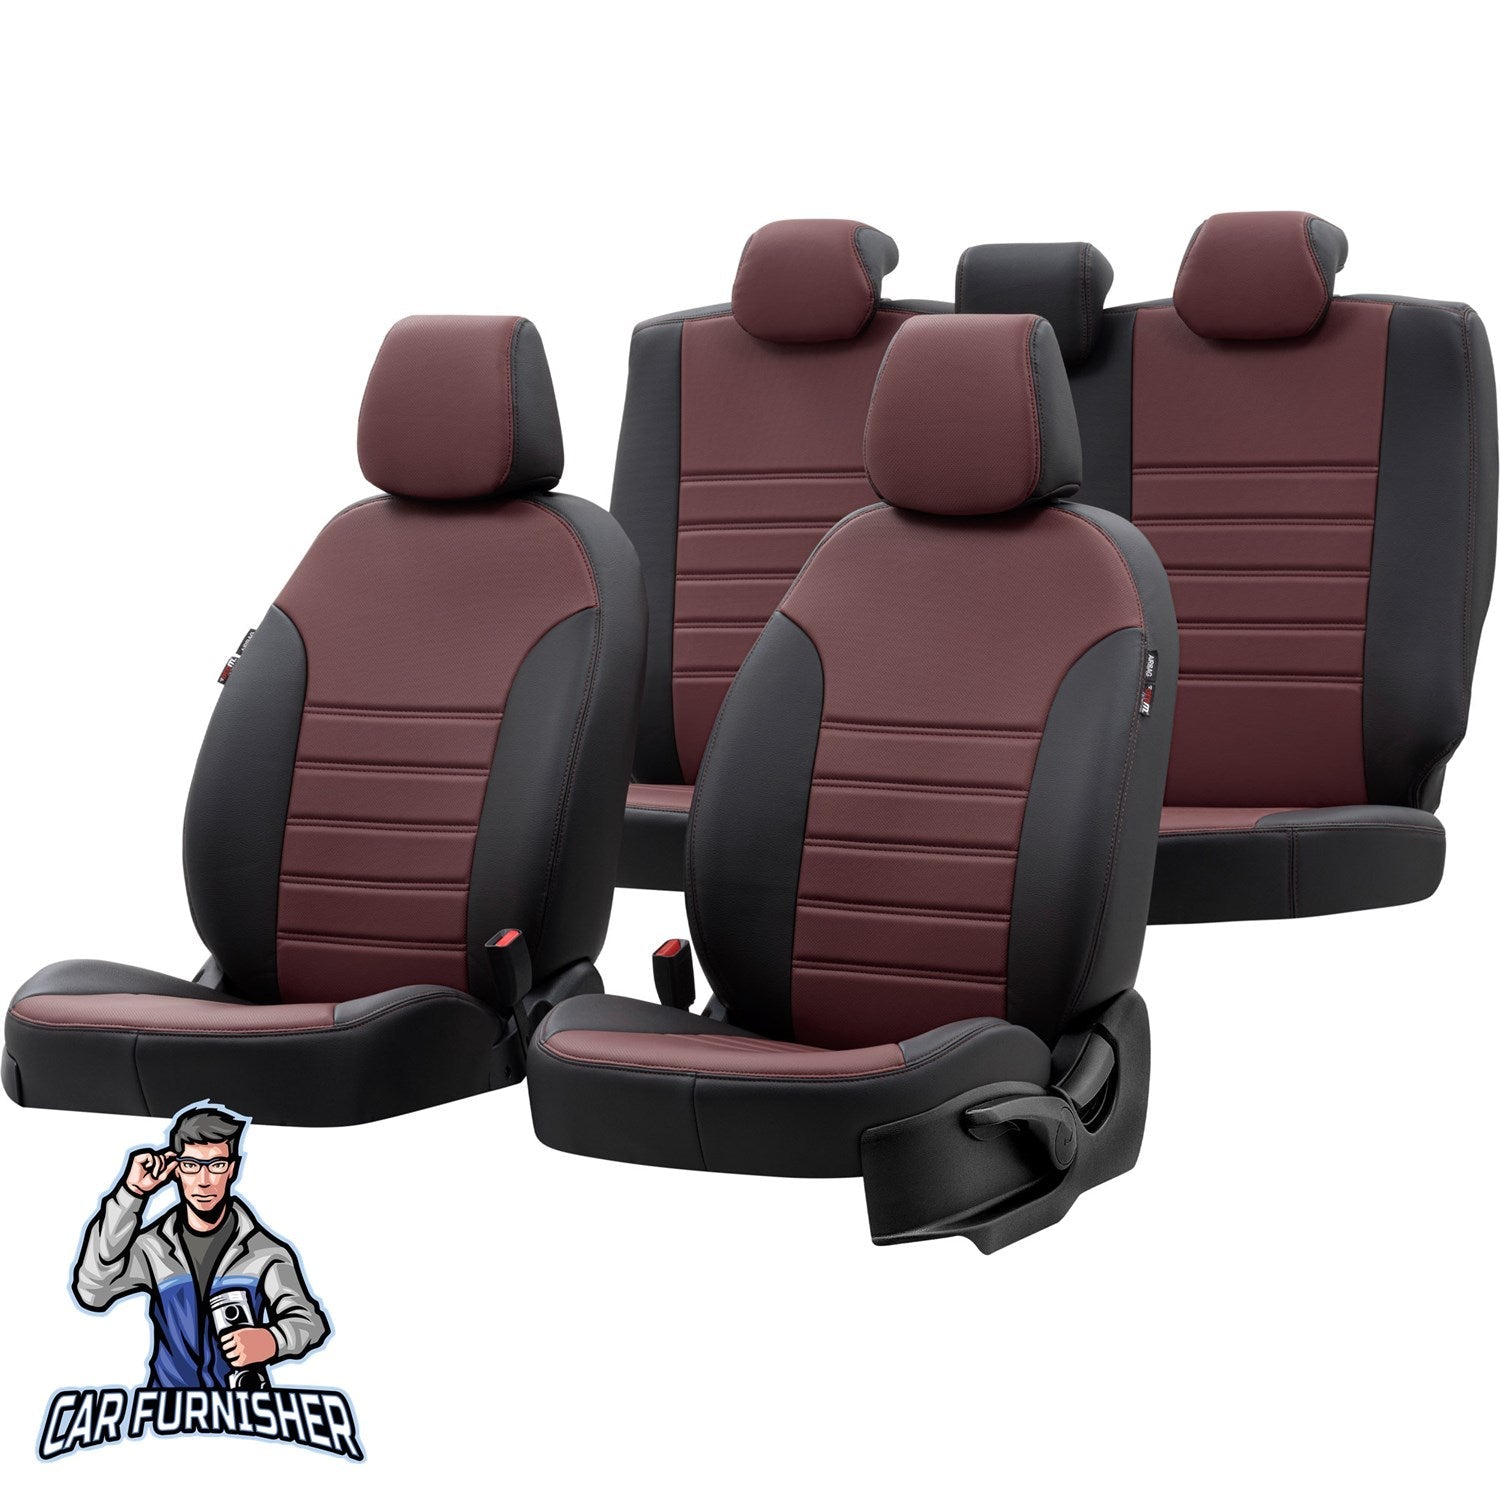 Toyota Hilux Seat Cover Istanbul Leather Design Burgundy Leather